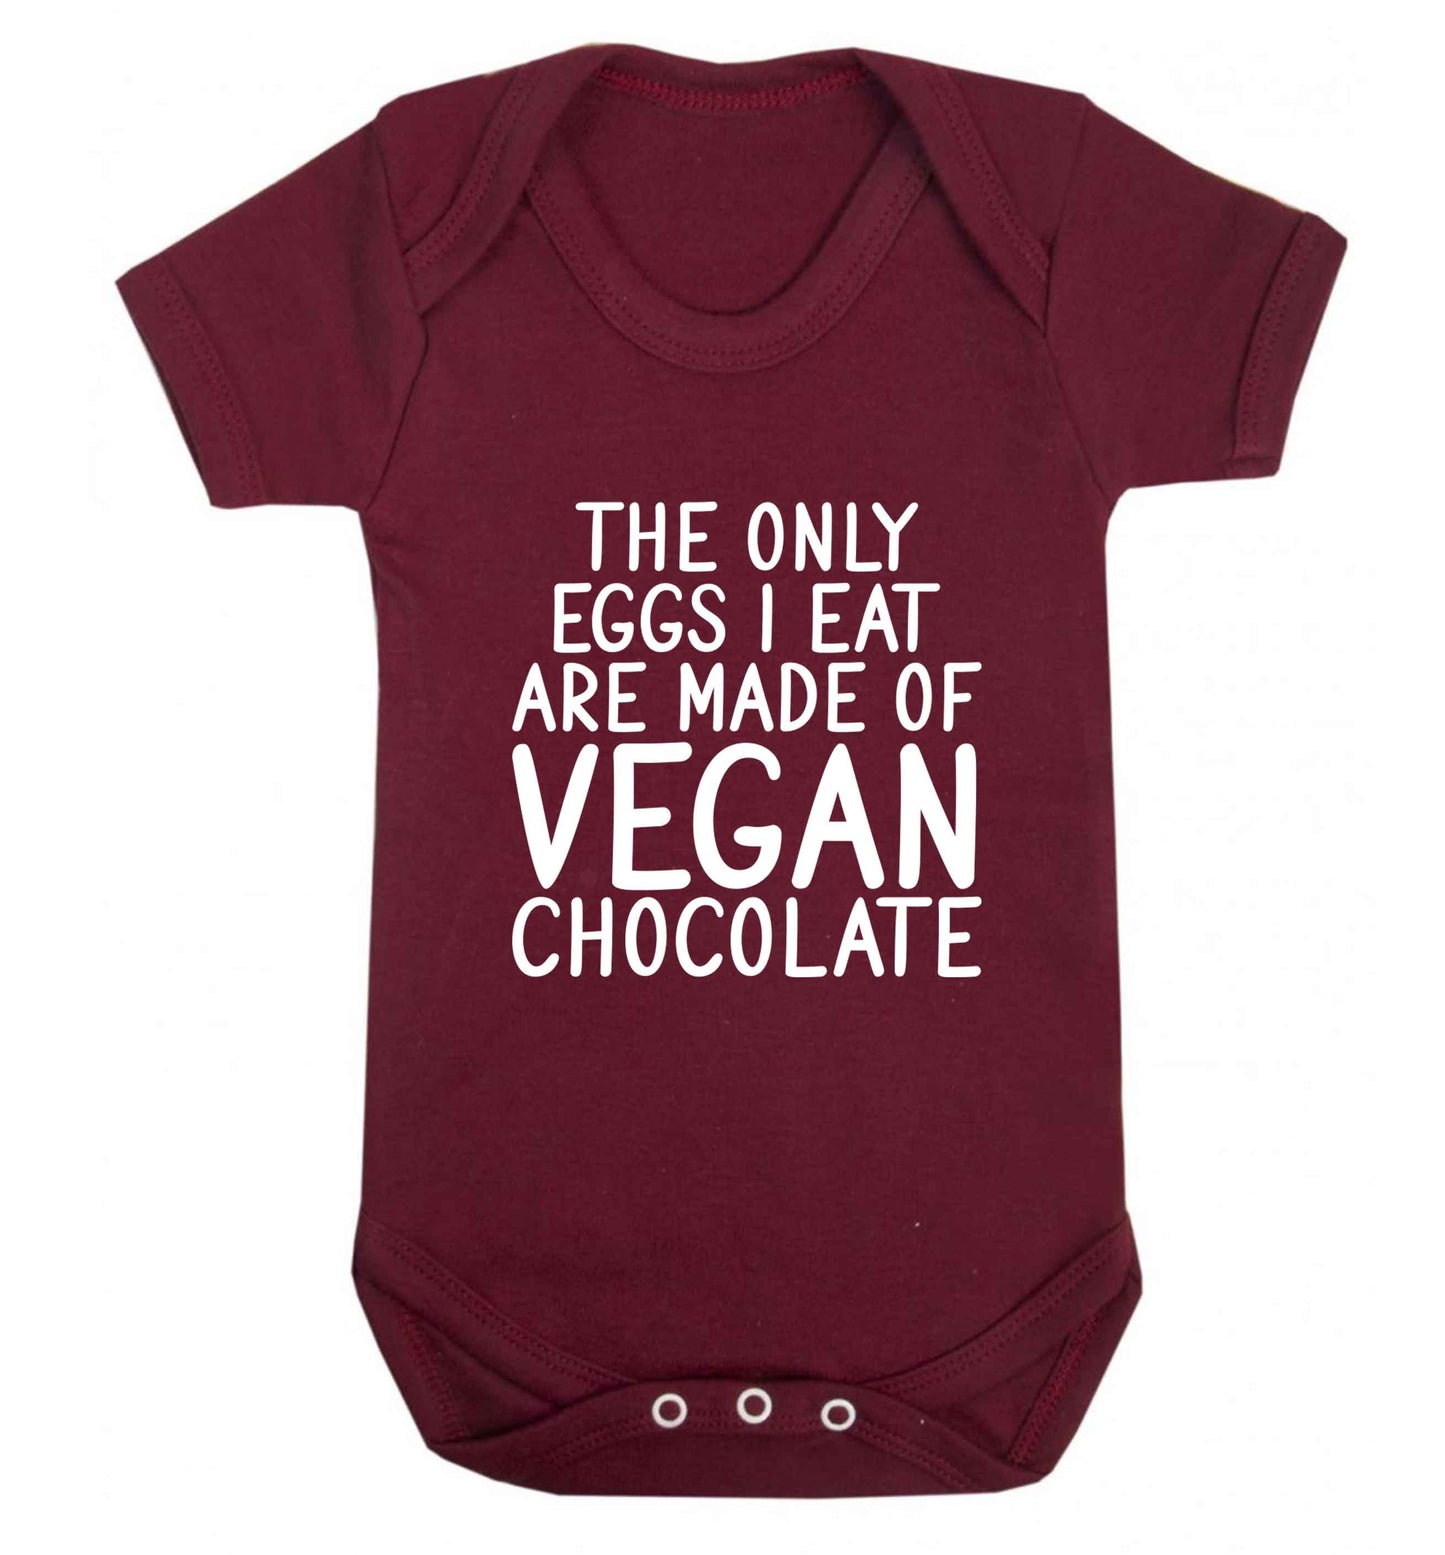 The only eggs I eat are made of vegan chocolate baby vest maroon 18-24 months